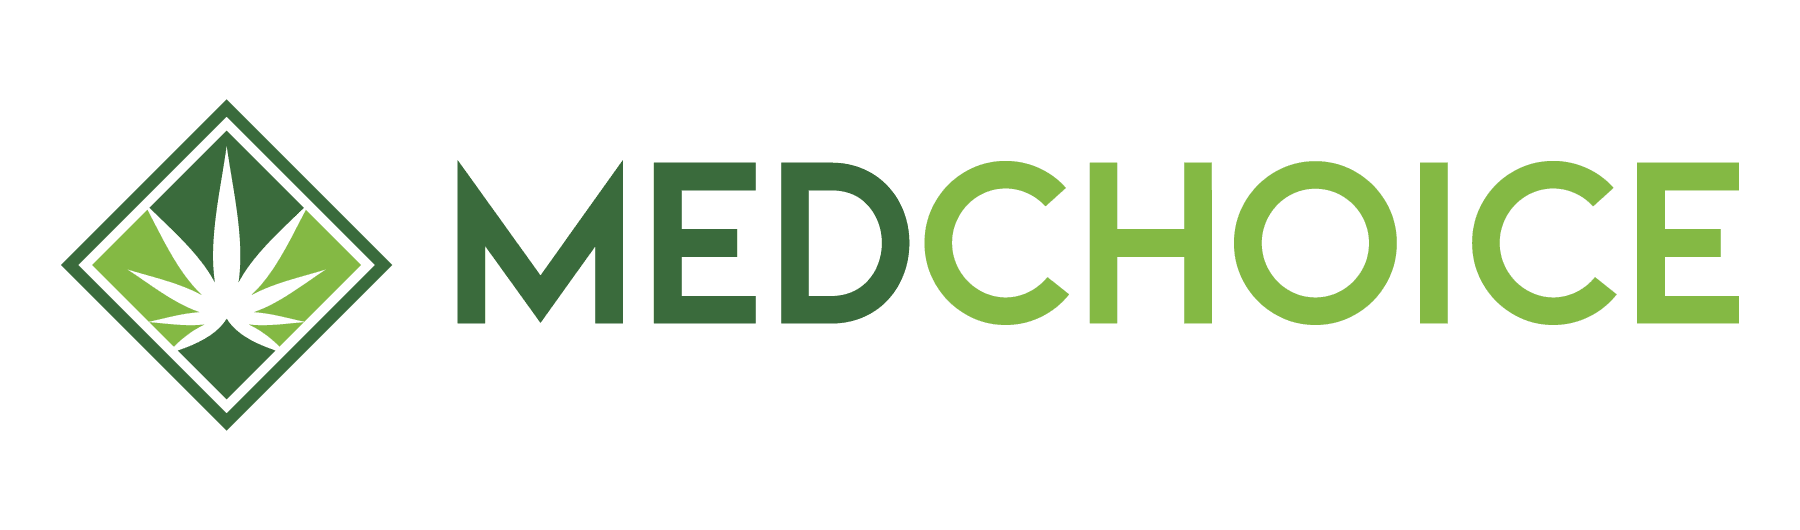 CBD Extract Products | Your Source for the Best | MedChoice CBD